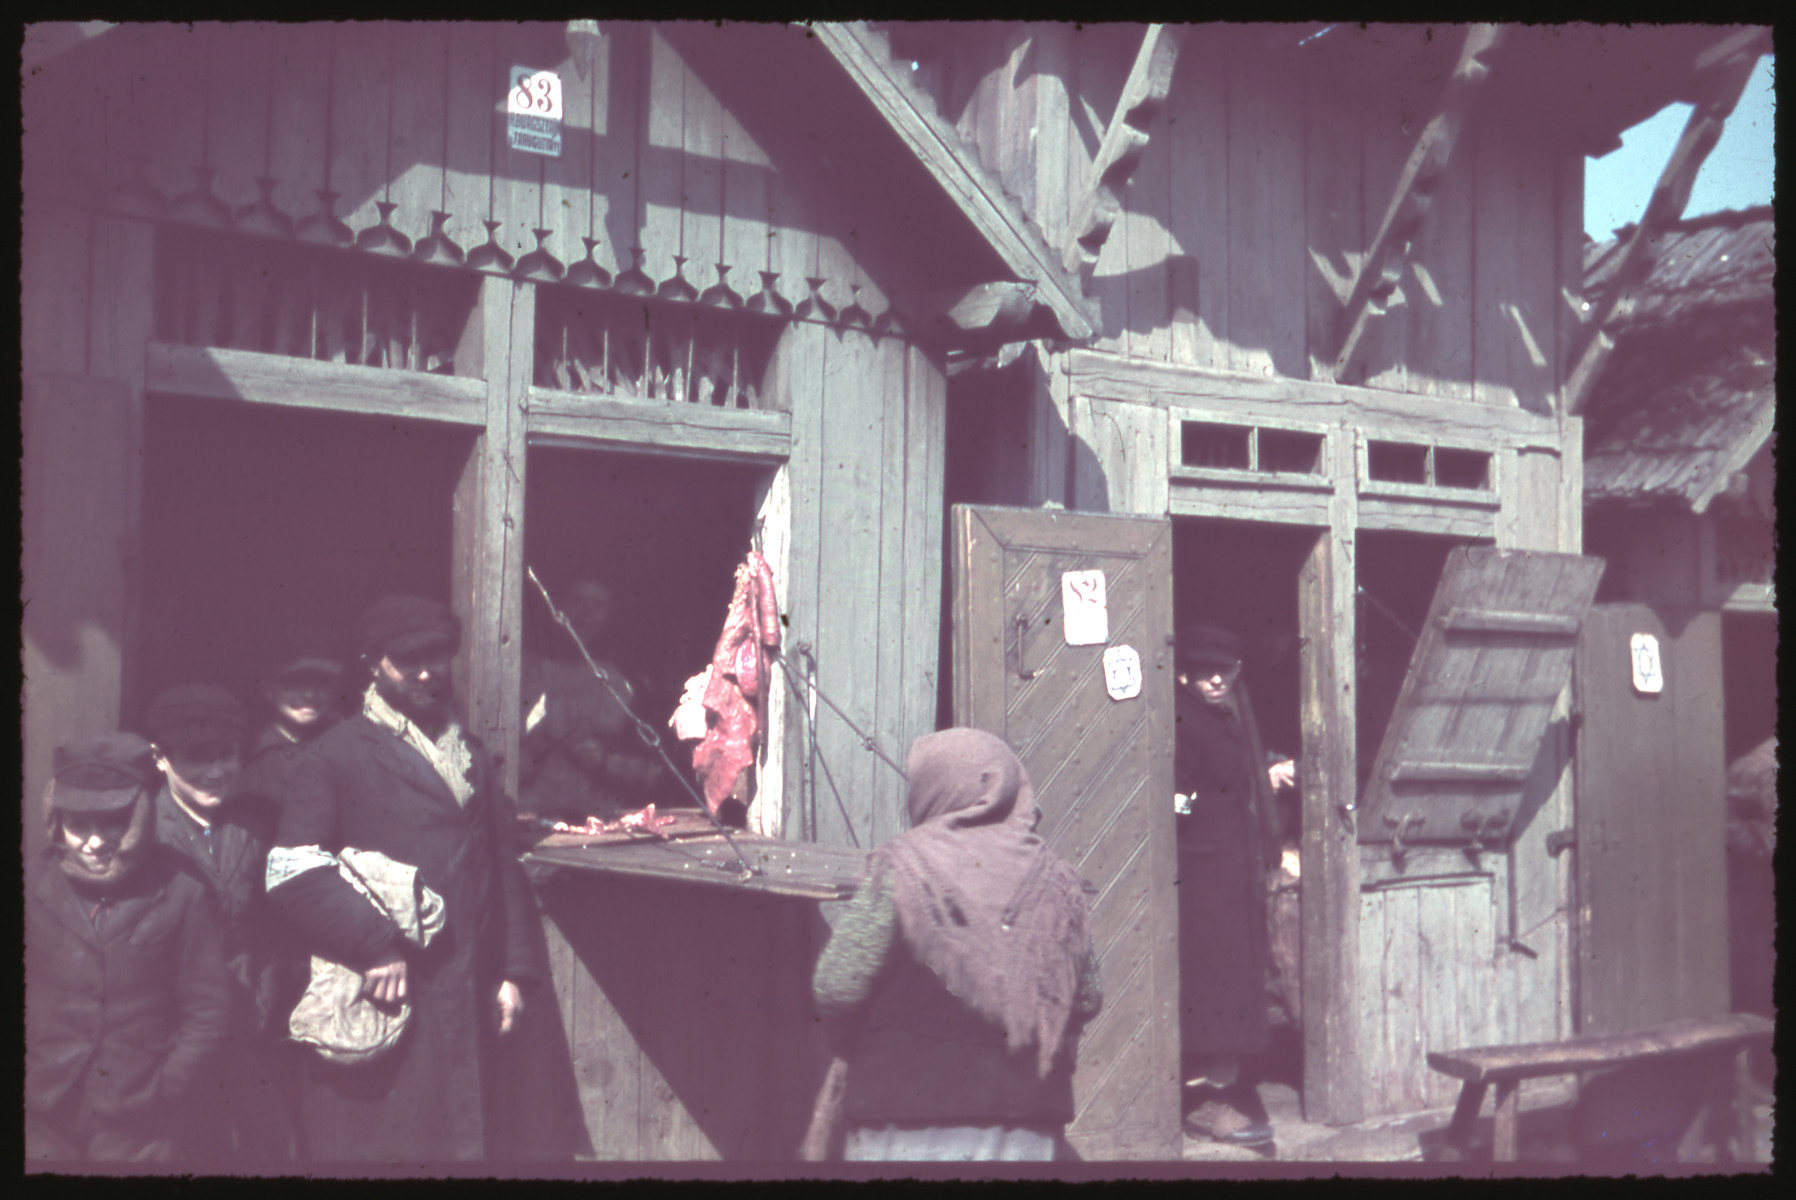 Jews shop in a store marked with a Jewish star on its door [possibly in Kozienice].